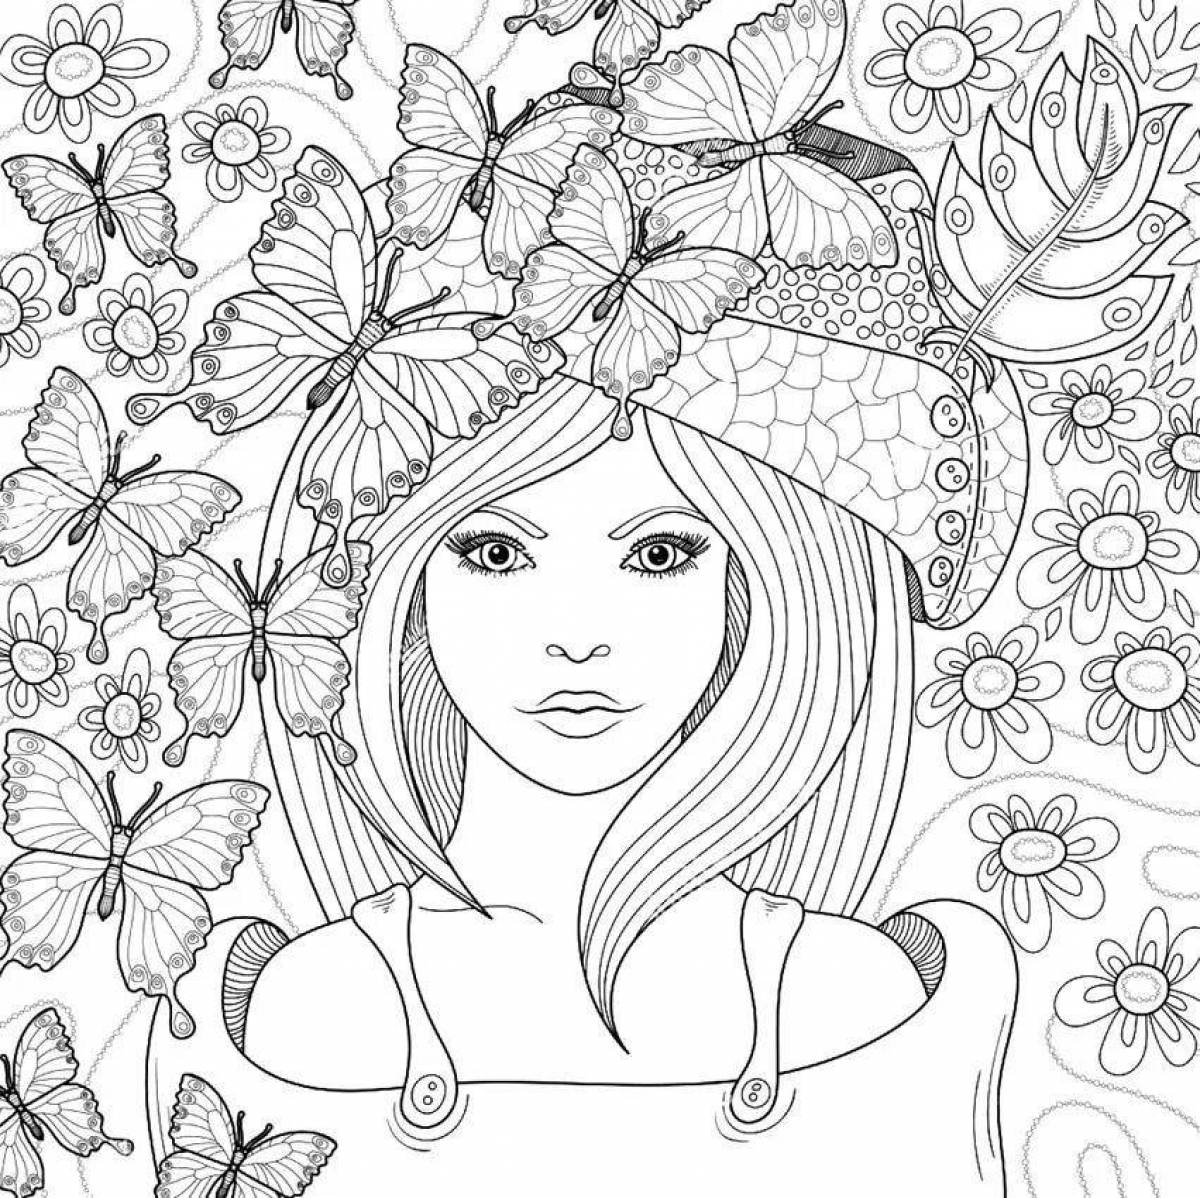 Charming coloring book for girls 20 years old